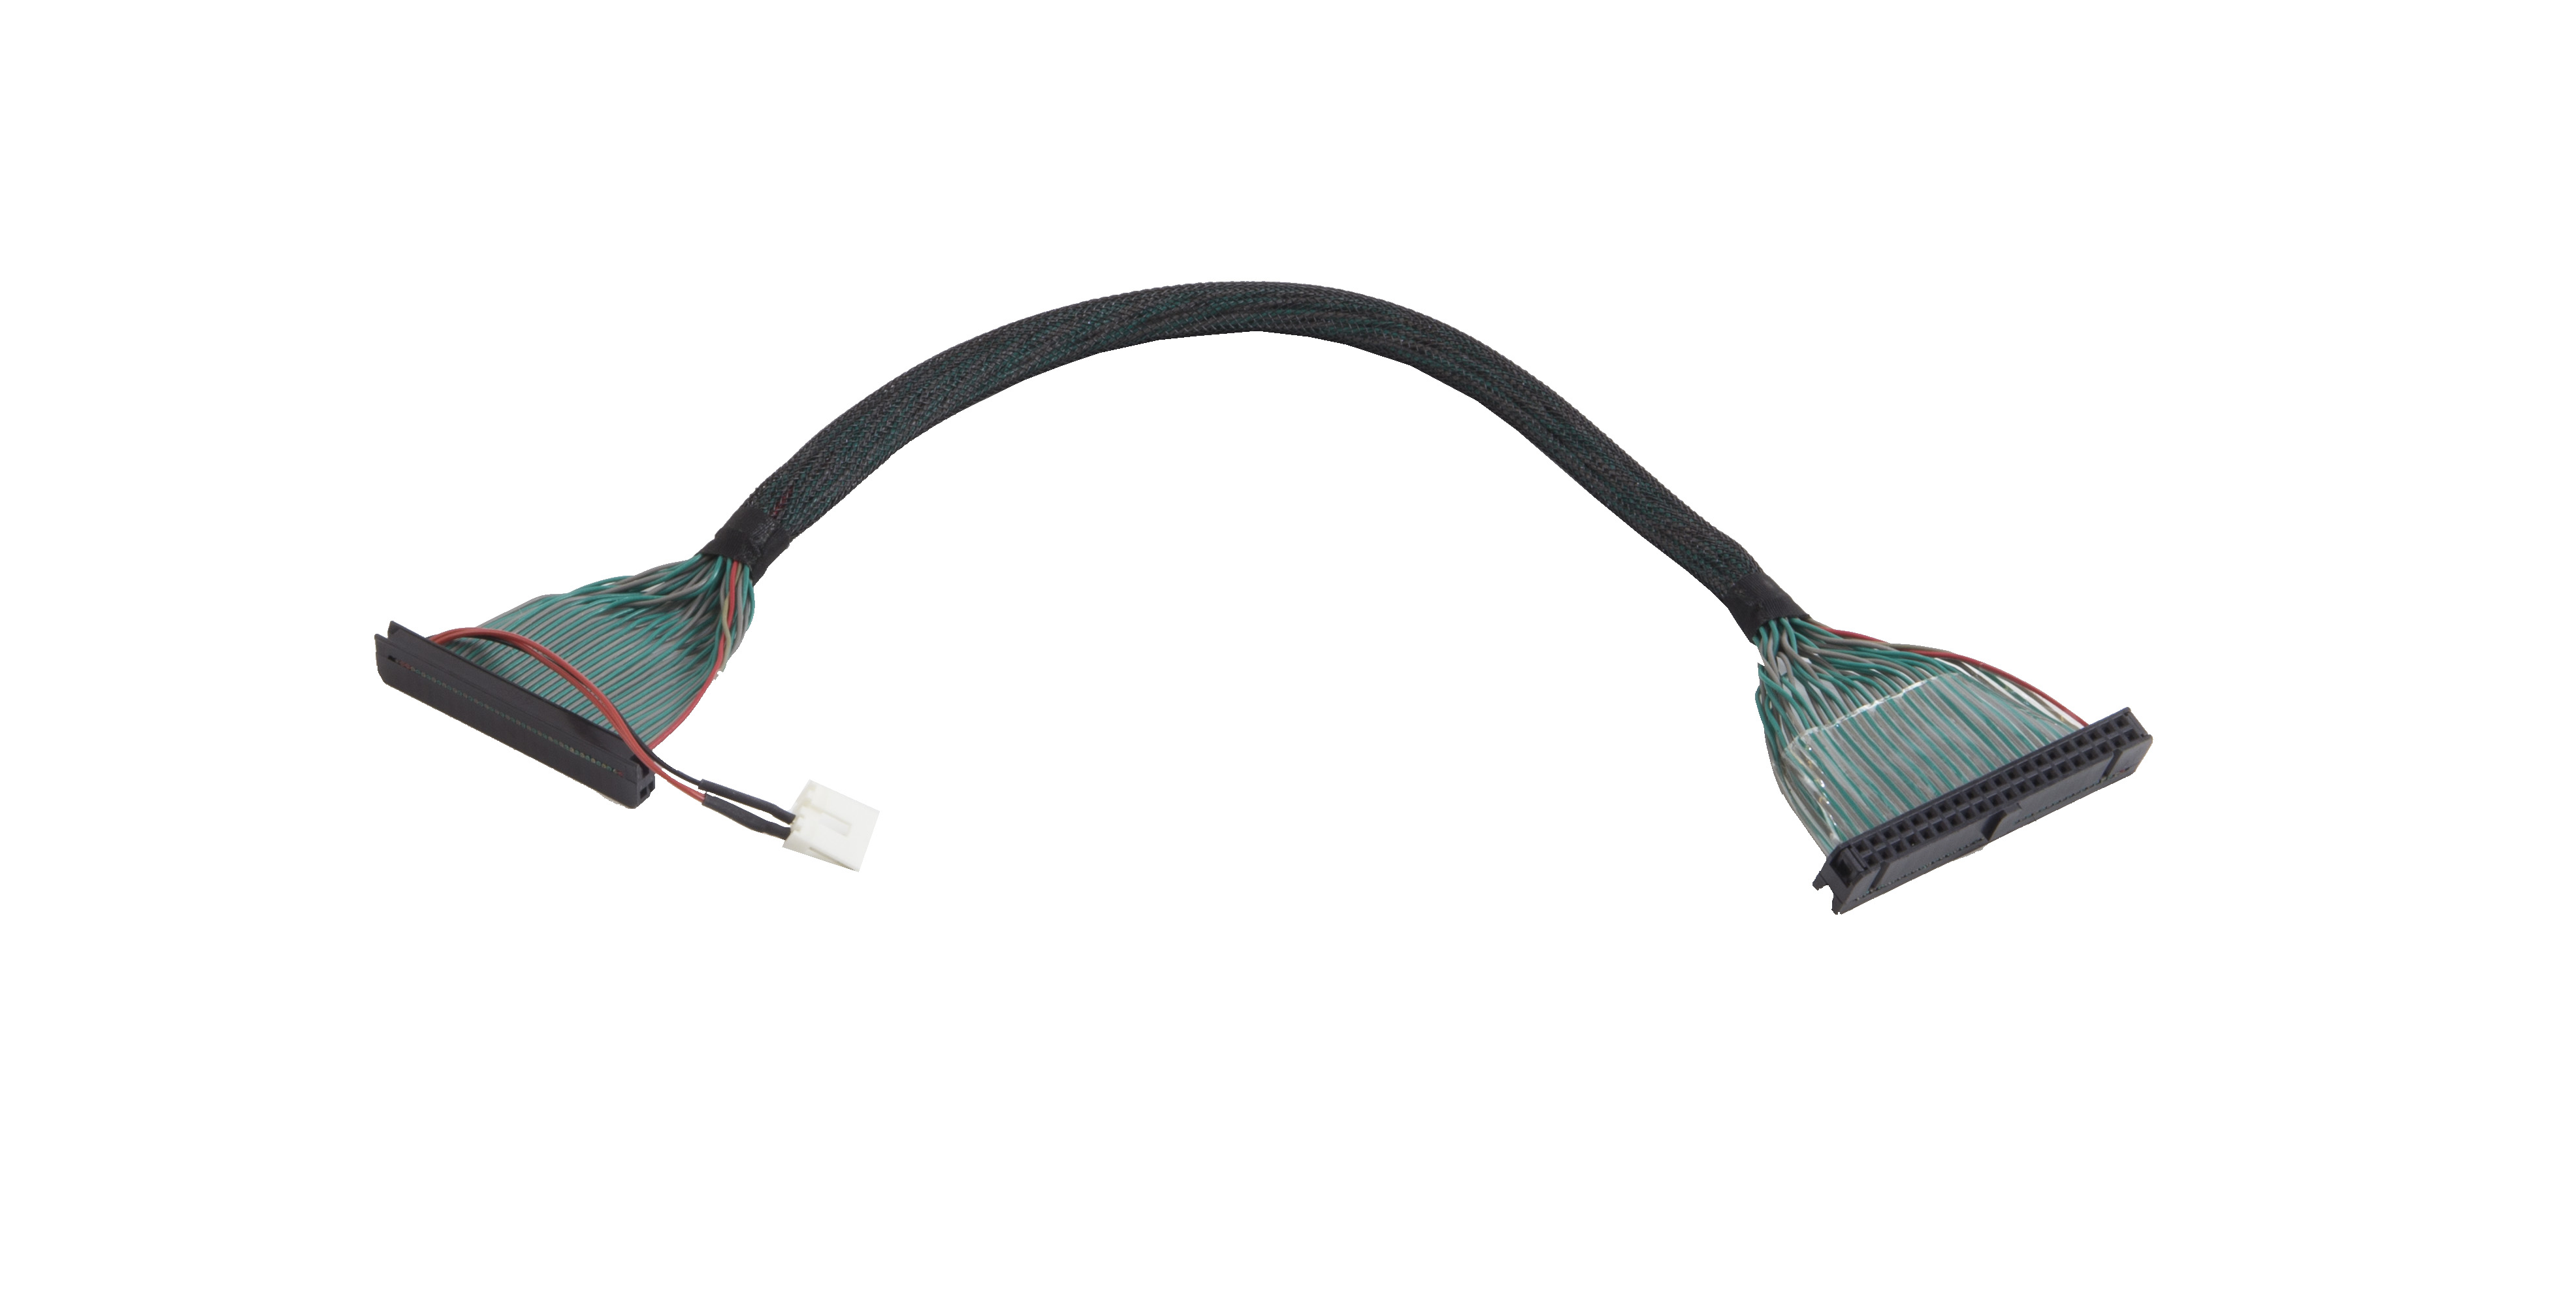 IDE CABLE FOR HDD(40PIN)  |Products|Accessories|Cable & Cord